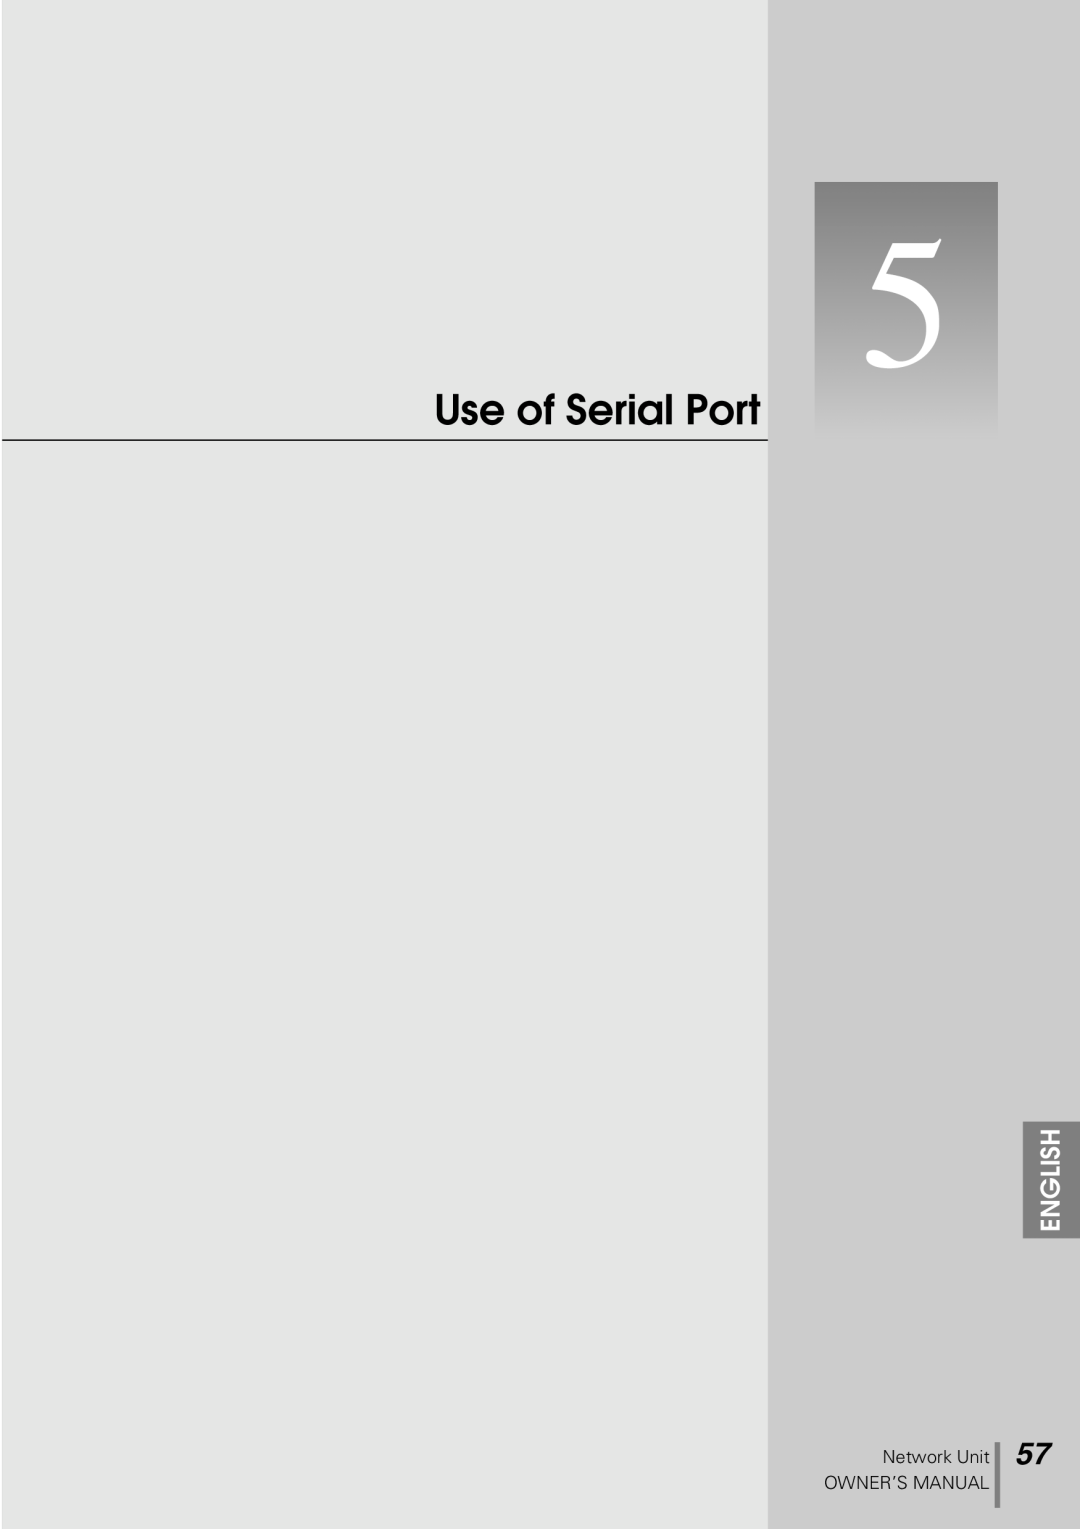 Sanyo POA-PN10 owner manual Use of Serial Port, English, Network Unit OWNER’S MANUAL 